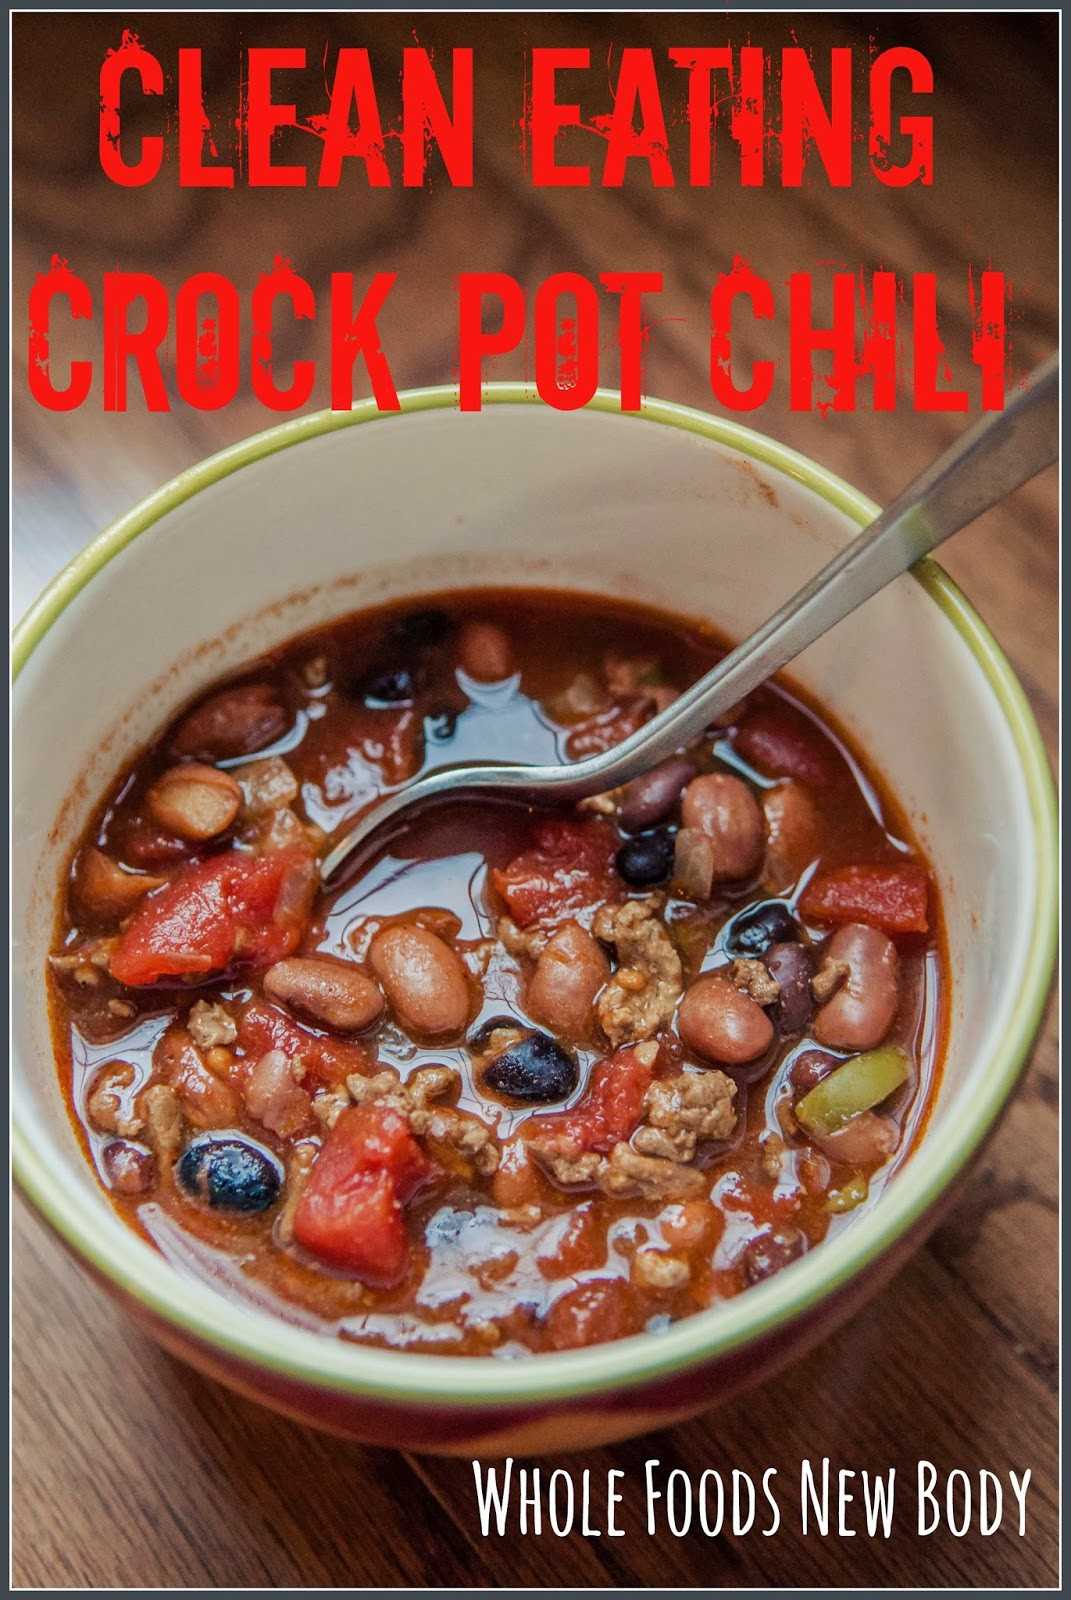 Clean Eating Crock Pot
 Whole Foods New Body Clean Eating Crock Pot Chili